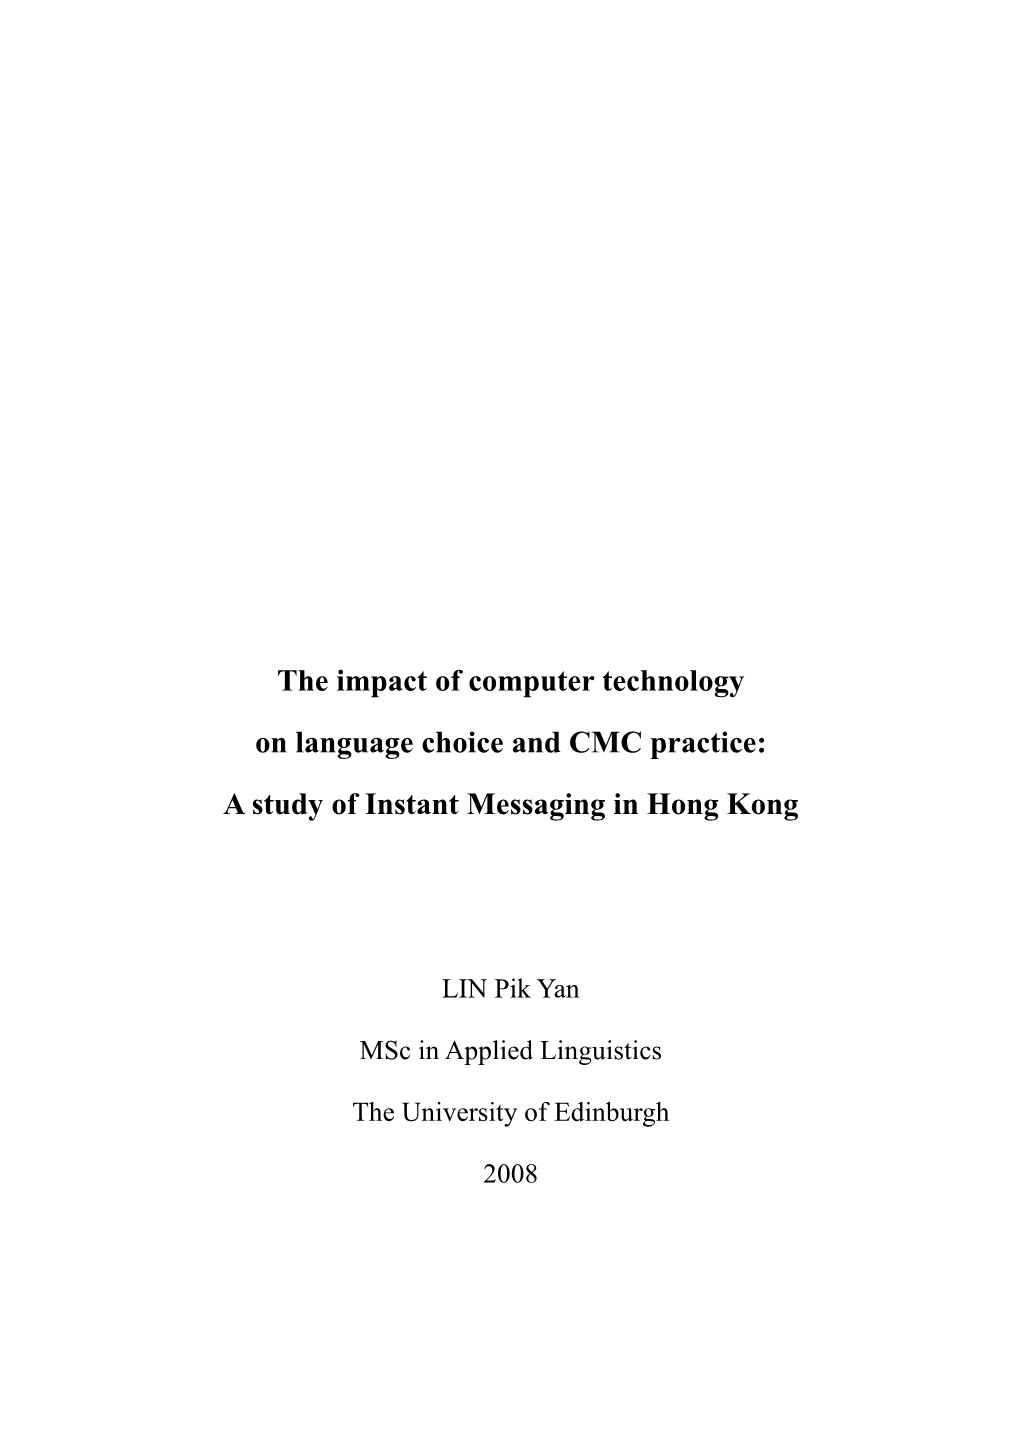 The Impact of Computer Technology on Language Choice and CMC Practice